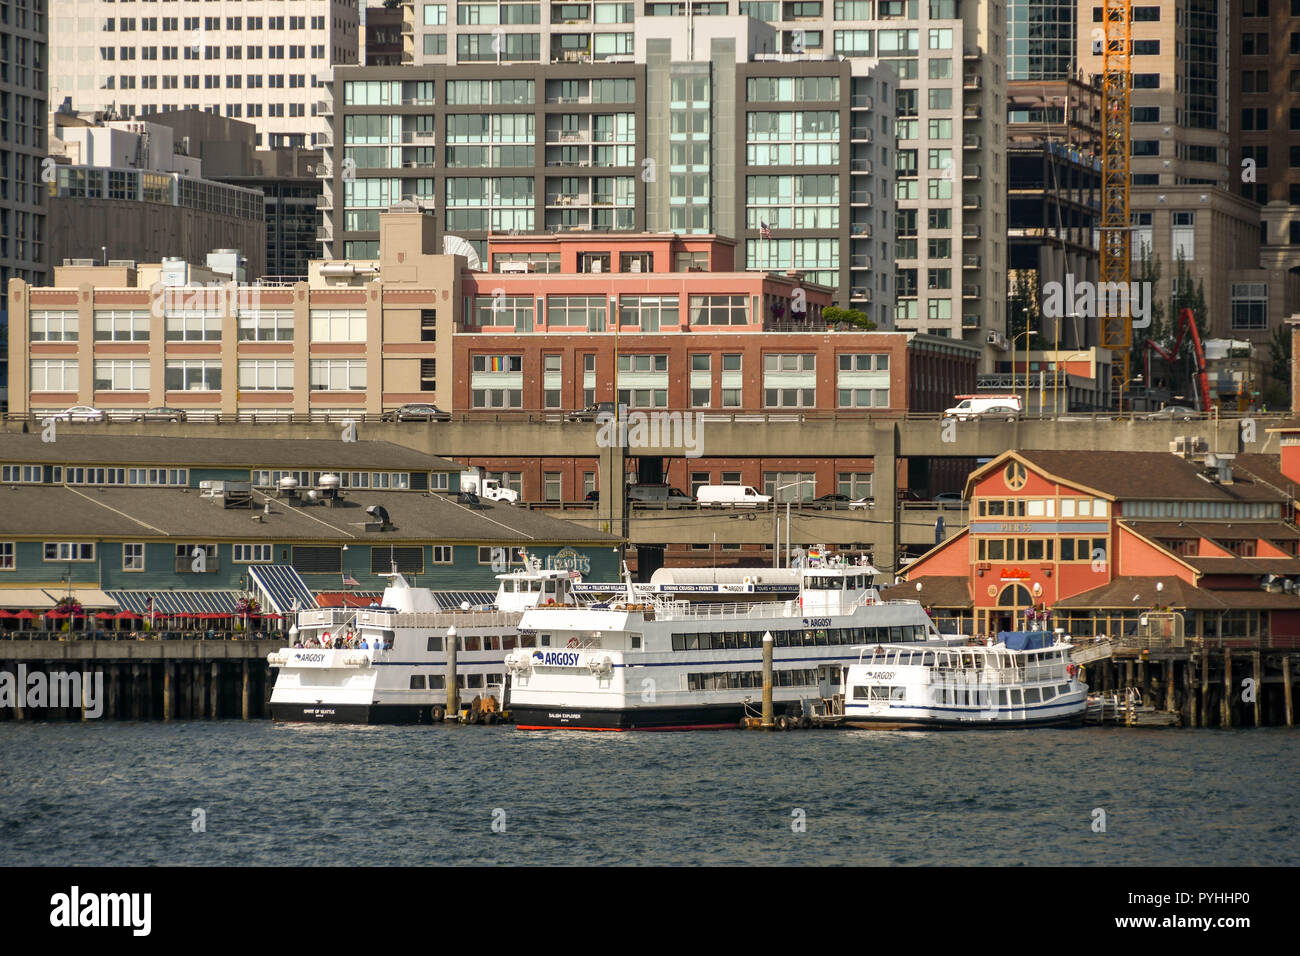 SEATTLE, WASHINGTON STATE, USA - JUNE 2018: Sightseeing cruise boats operated by Argosy berthed at Pier 55 in Seattle. Stock Photo